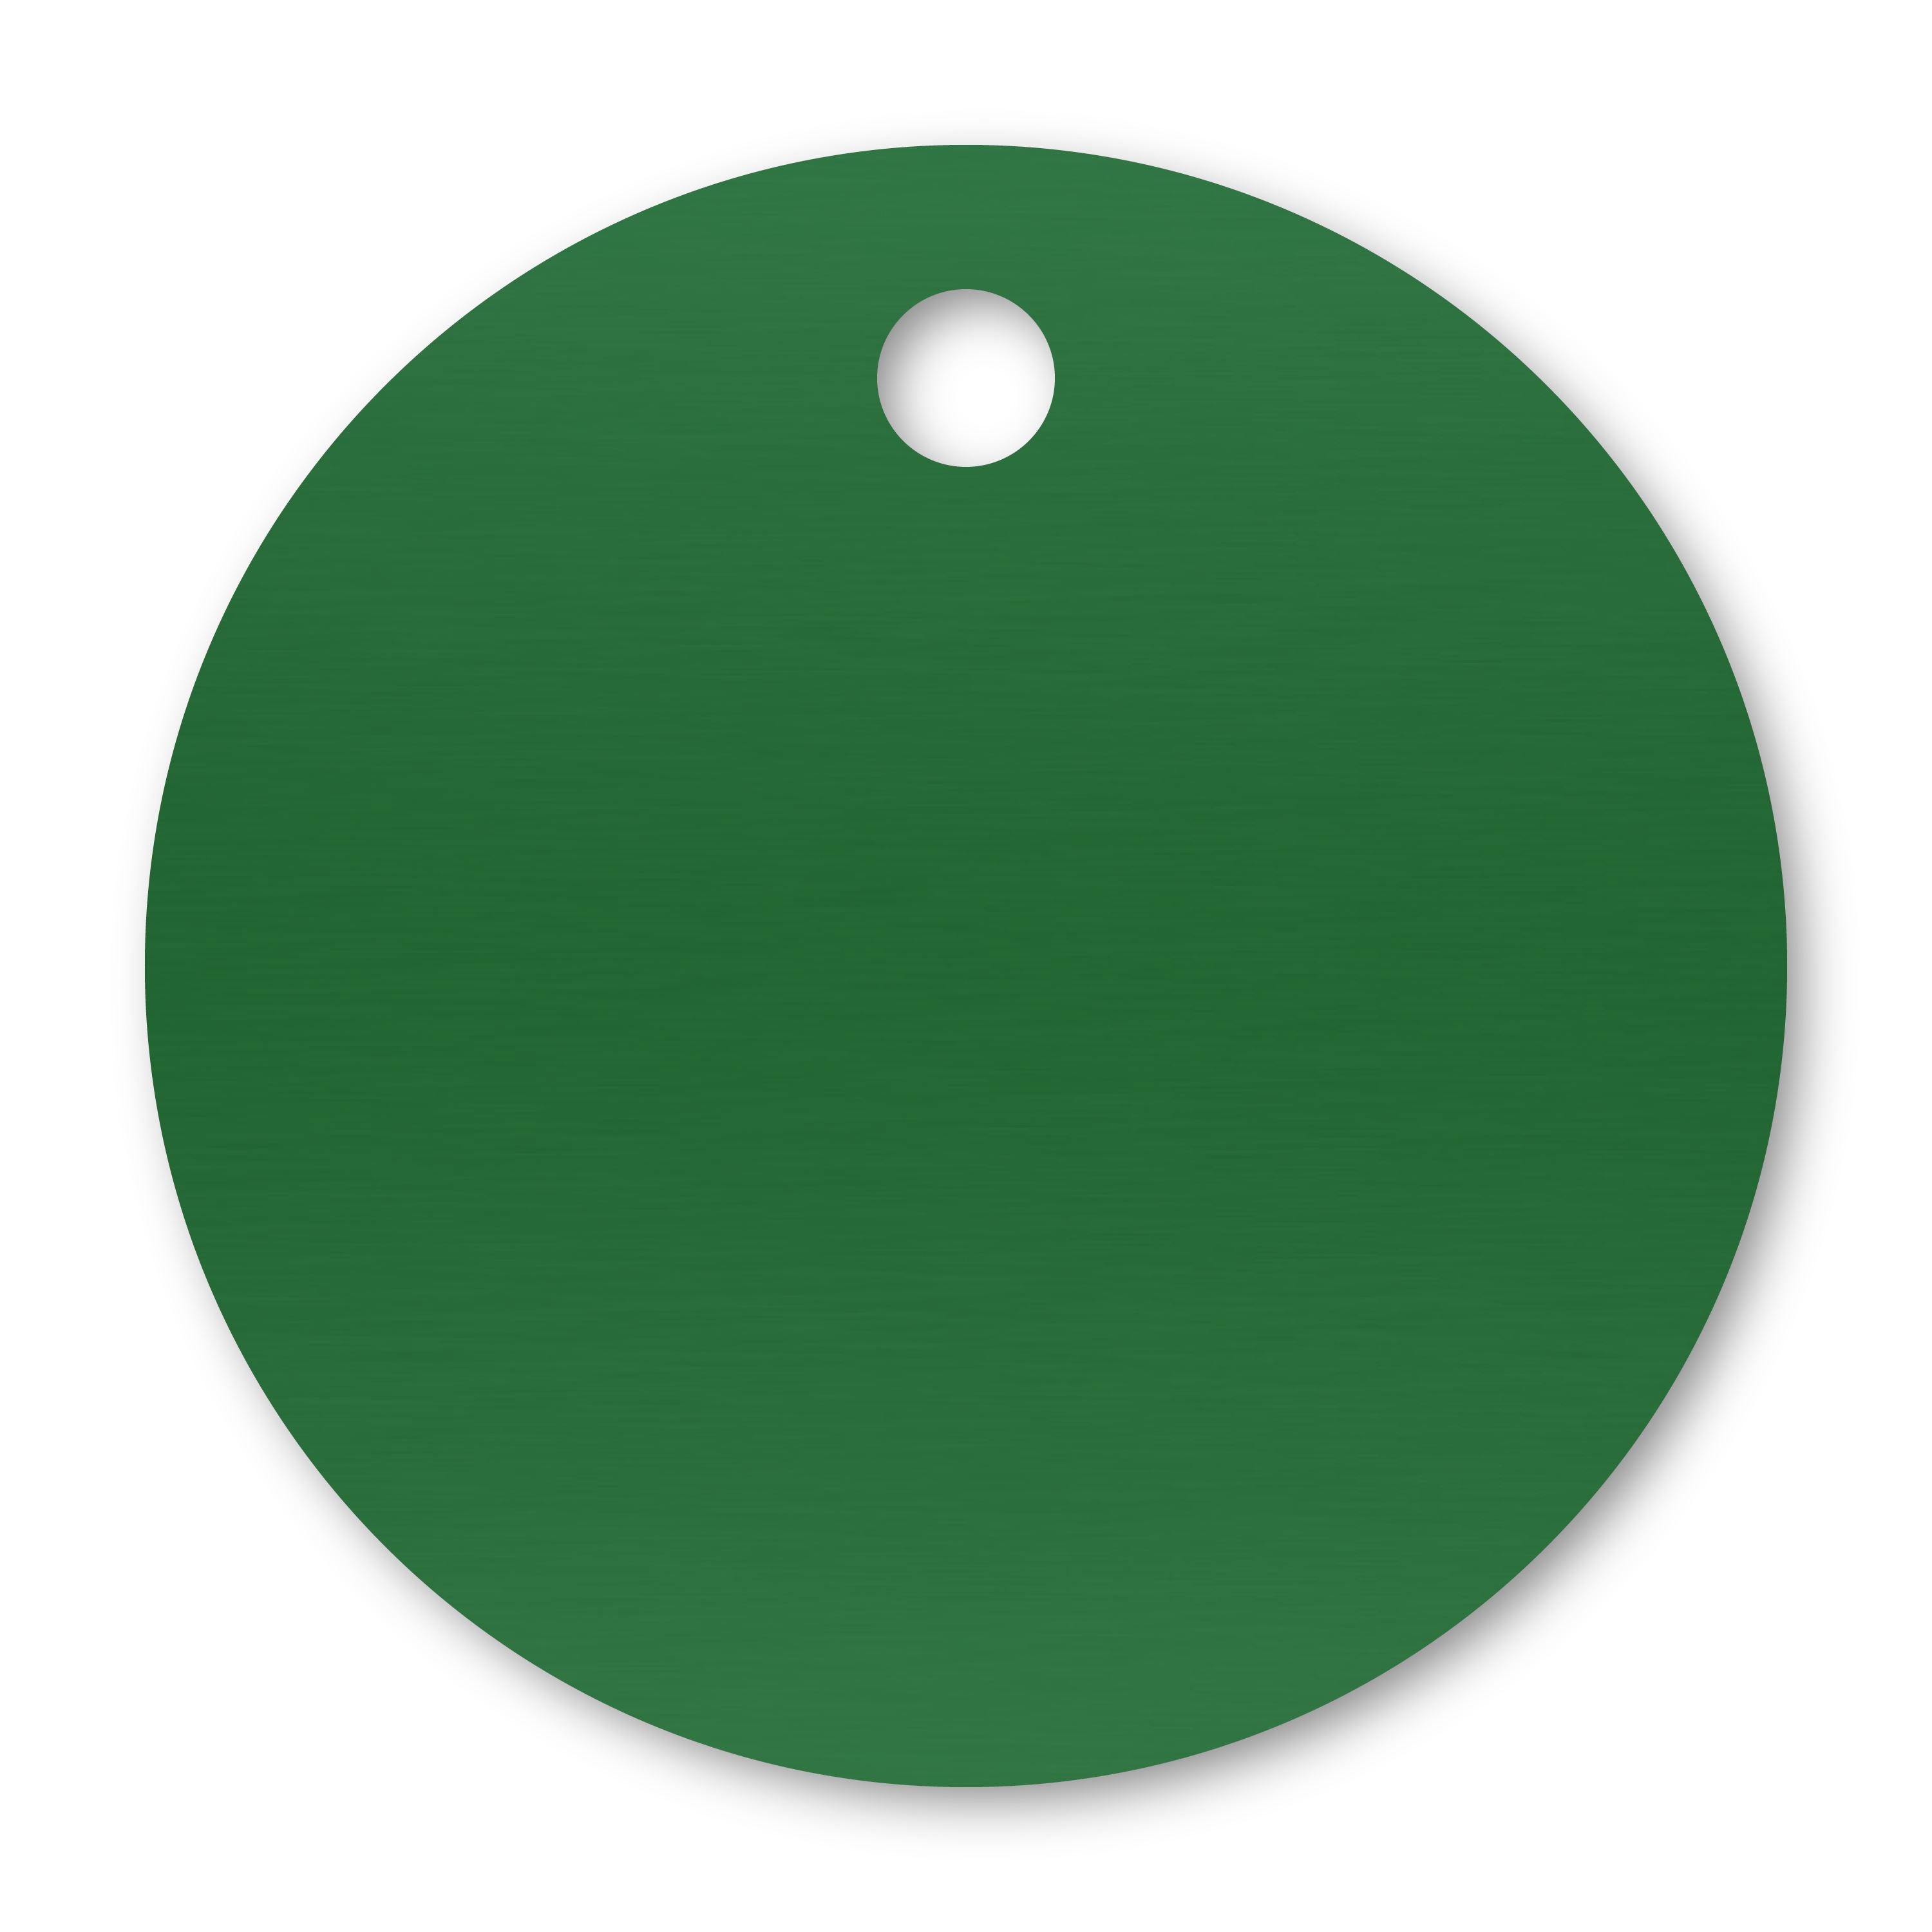 Anodized Aluminum Round Tags, 1-1/2" with 1/8" Hole, Laser Engraved Metal Tags Craftworks NW Green 